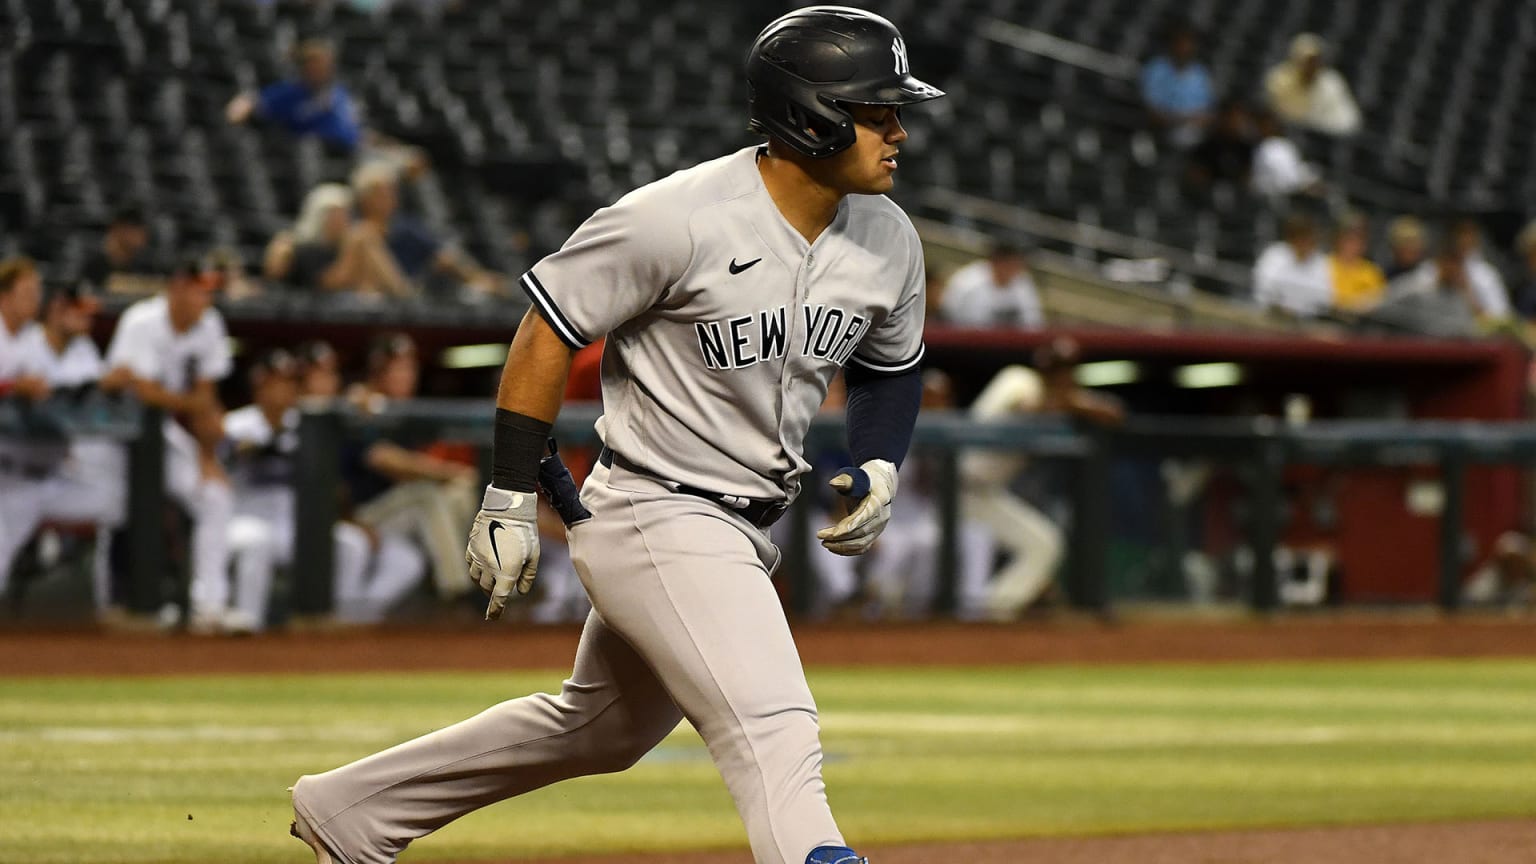 Yankees prospect Jasson Dominguez jogs to first base